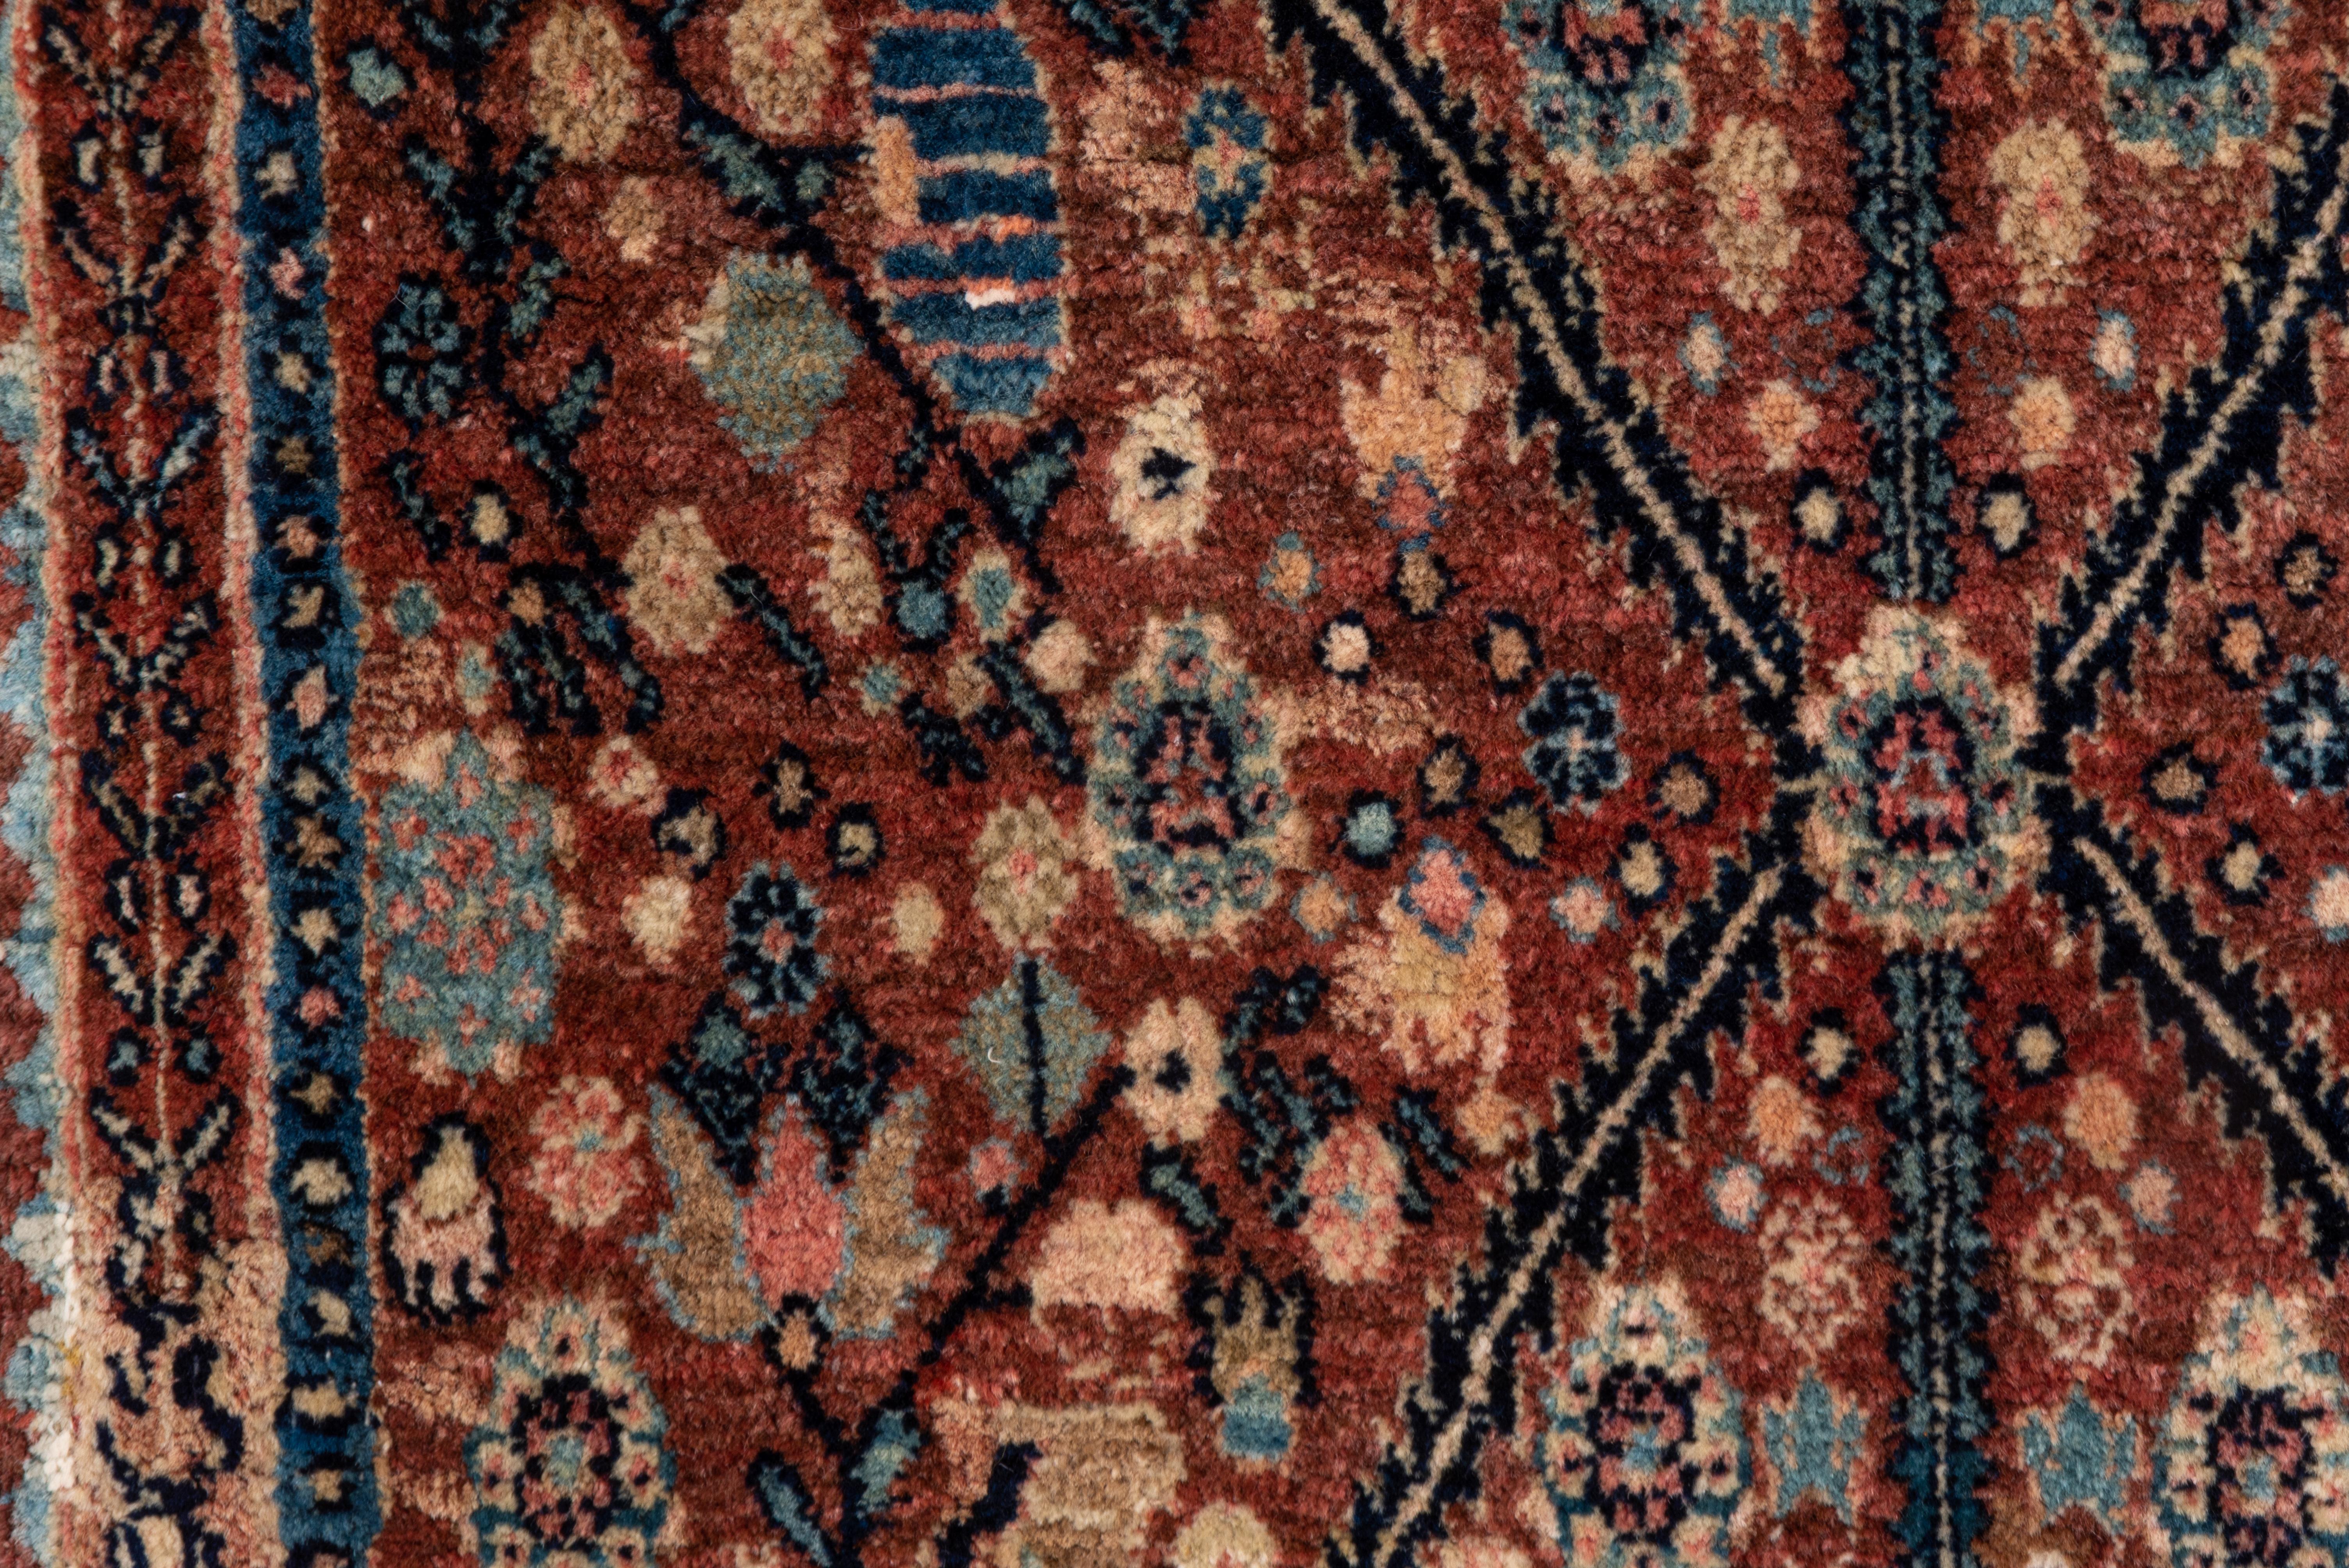 A rare Kurdistan Bidjar mat that is a full composition rather than a design sampler (wagireh). The red, flower filled field is centered by a thin 'X' pattern intersecting a vertical staff ending in boxy vases. Pale green and various blue accents.